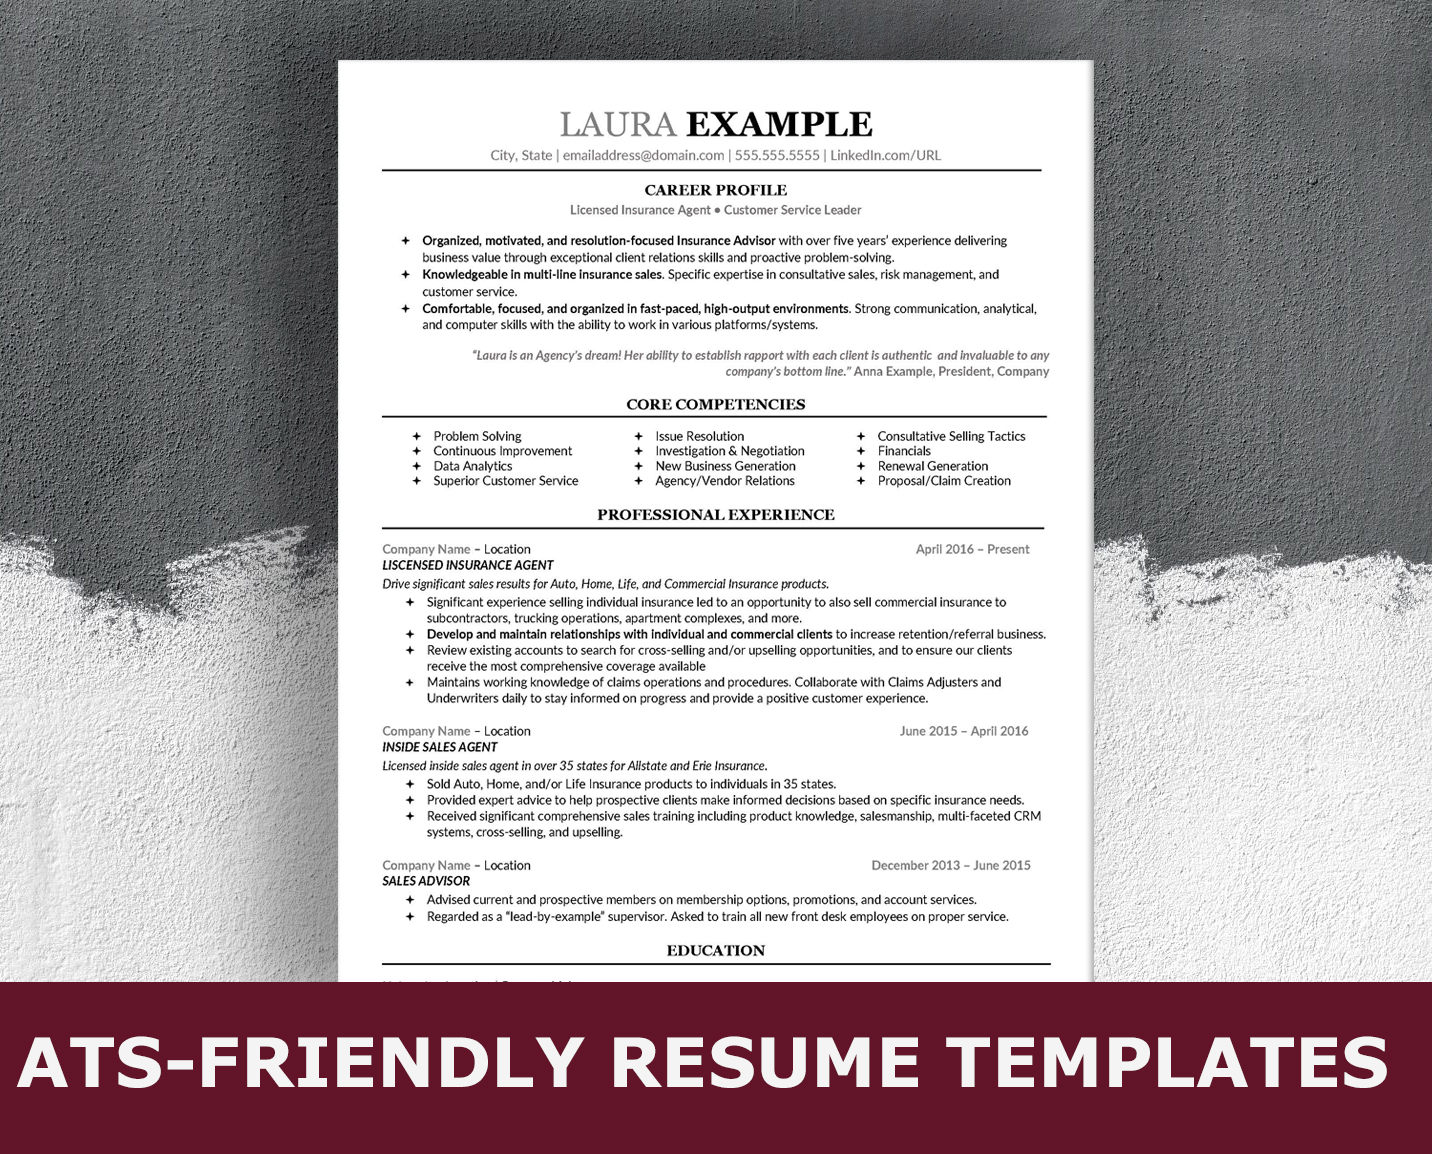 Ats Friendly Resume Format from images.squarespace-cdn.com